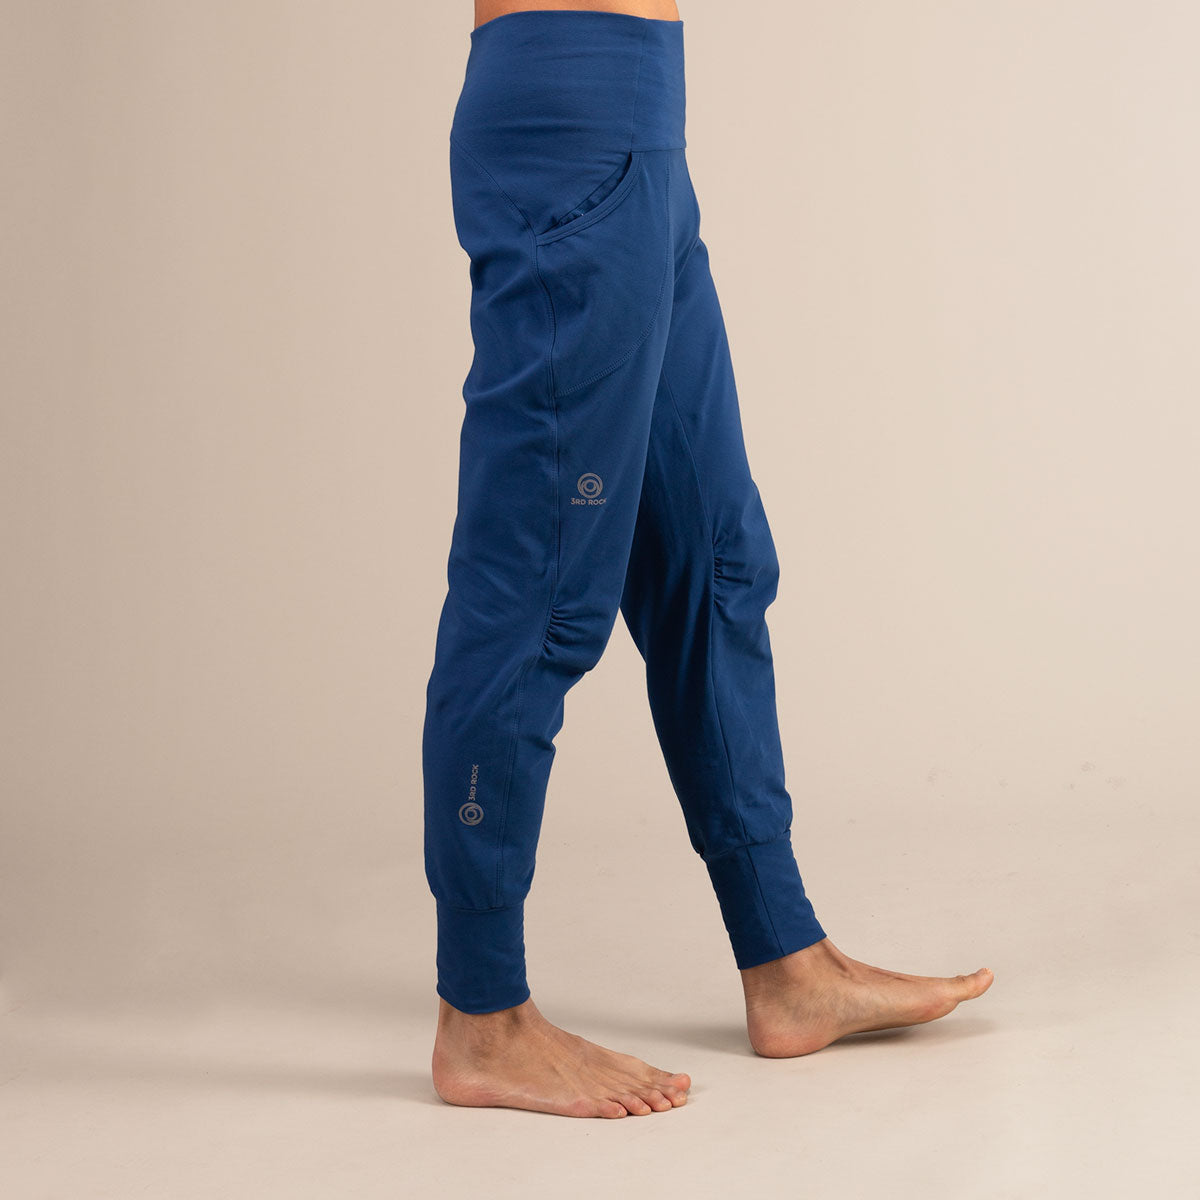 BATABOOM Sweatpants | Super Soft Organic Sweats | 3RD ROCK Clothing -  Billy is 5ft 11 with a 30" waist, 37" hips and wears a 30/RL.  M